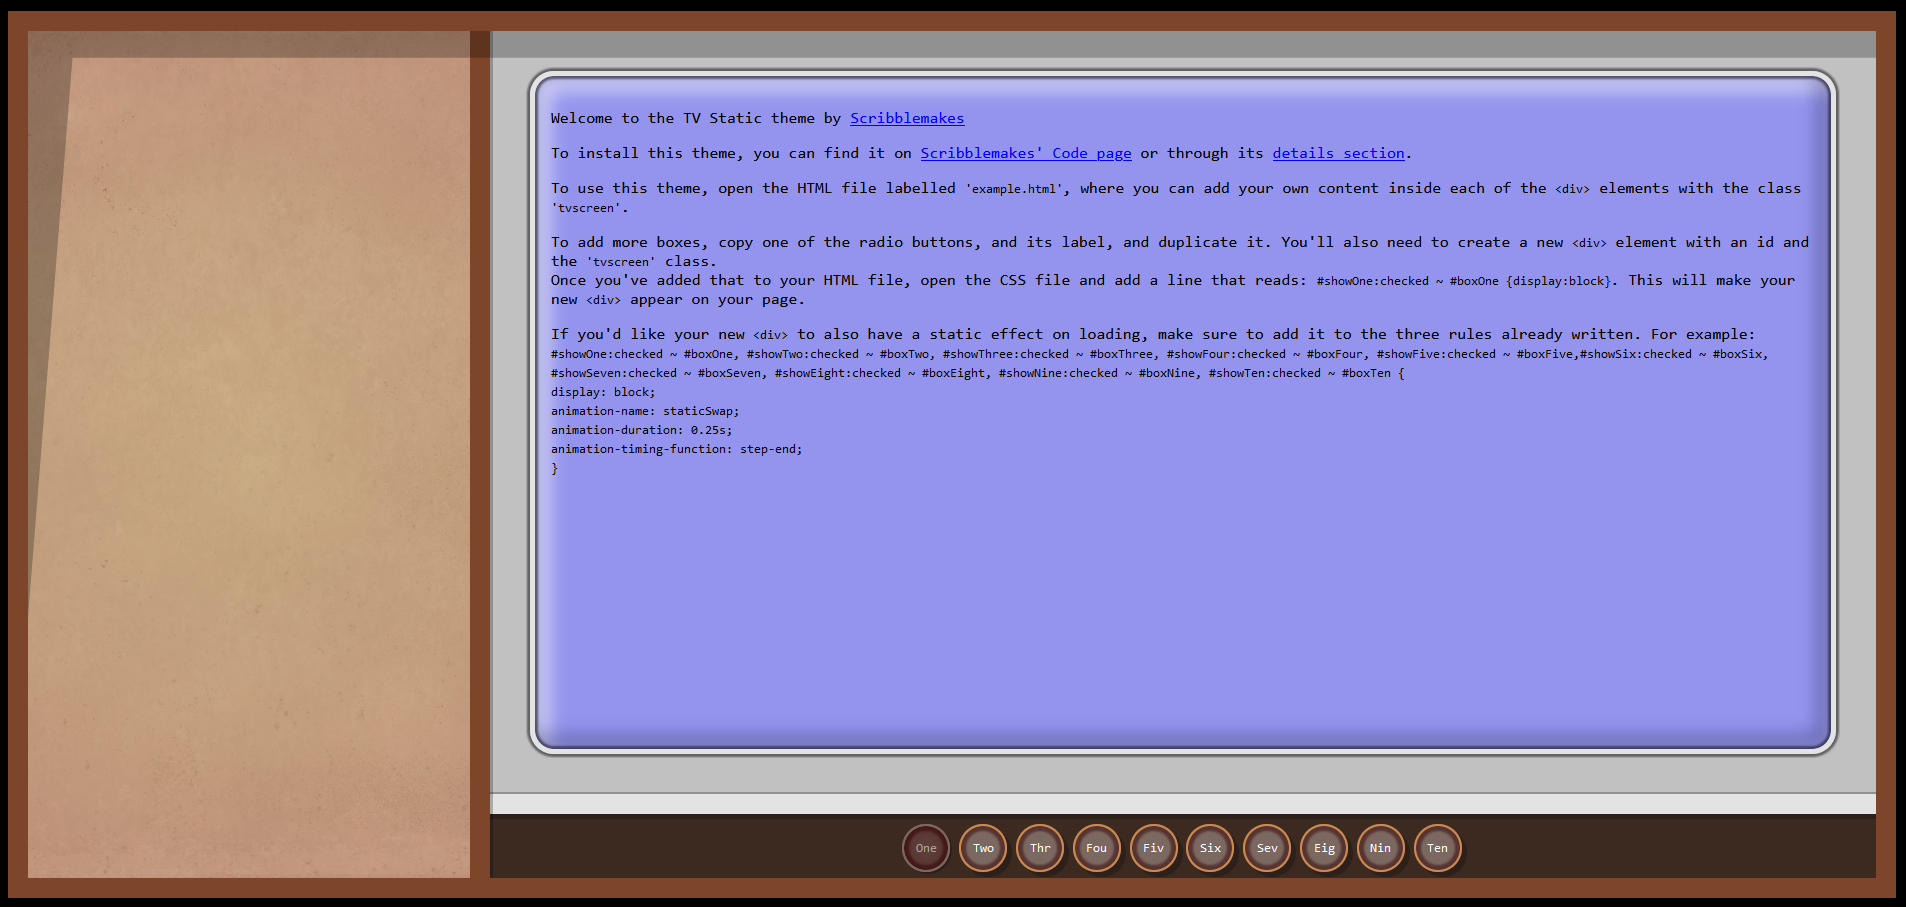 A preview image of a website theme named 'TV Static'.